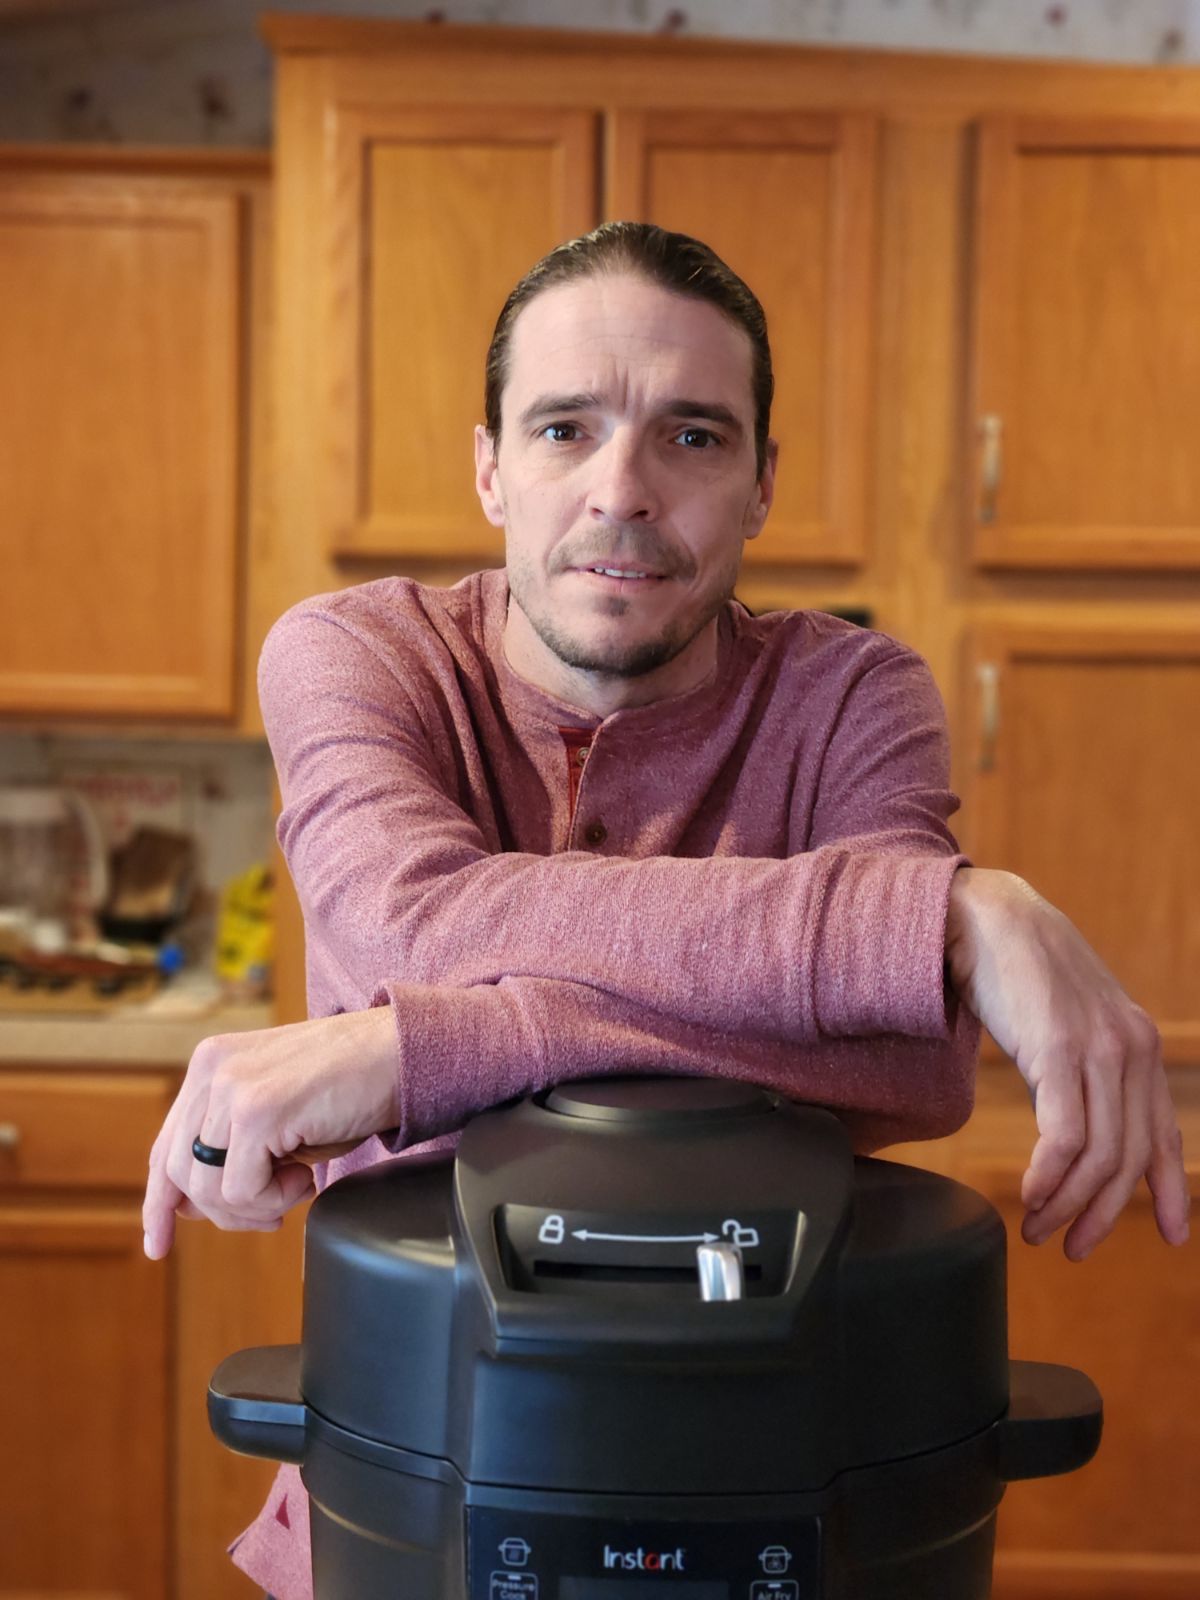 jason phillips with his instant pot